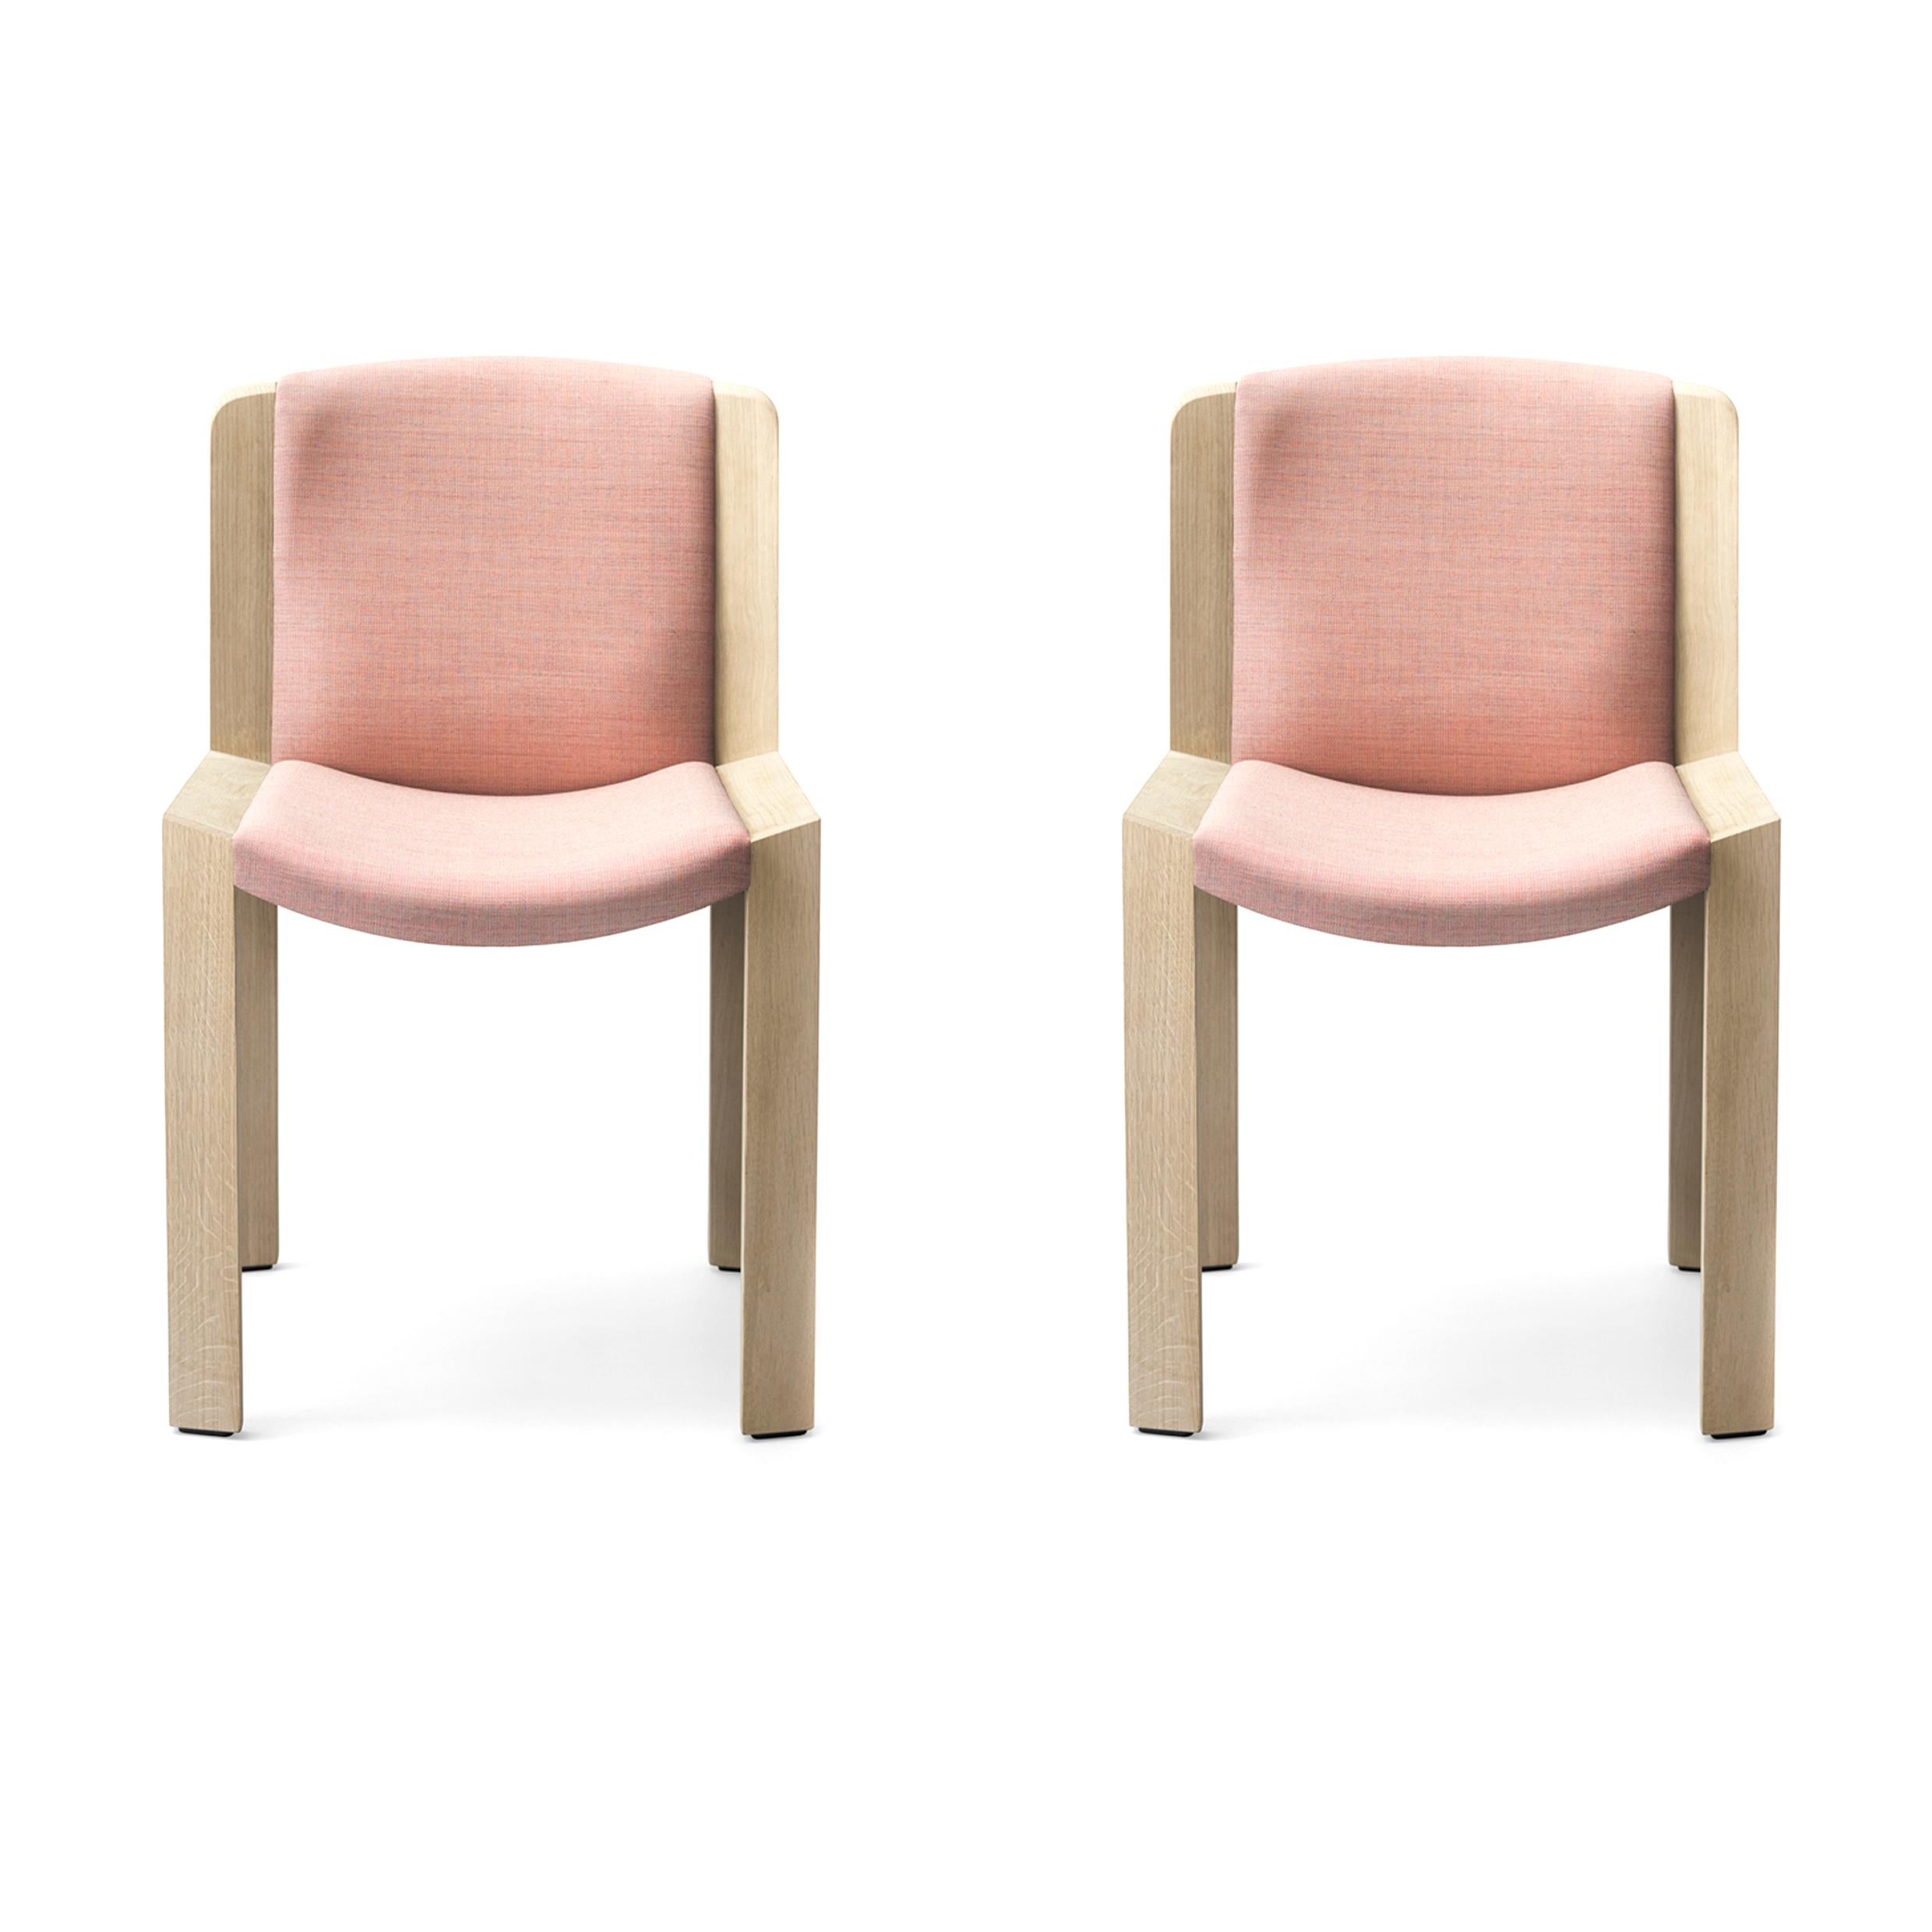 Set of Two Joe Colombo 'Chair 300' Wood and Sørensen Leather by Karakter For Sale 4